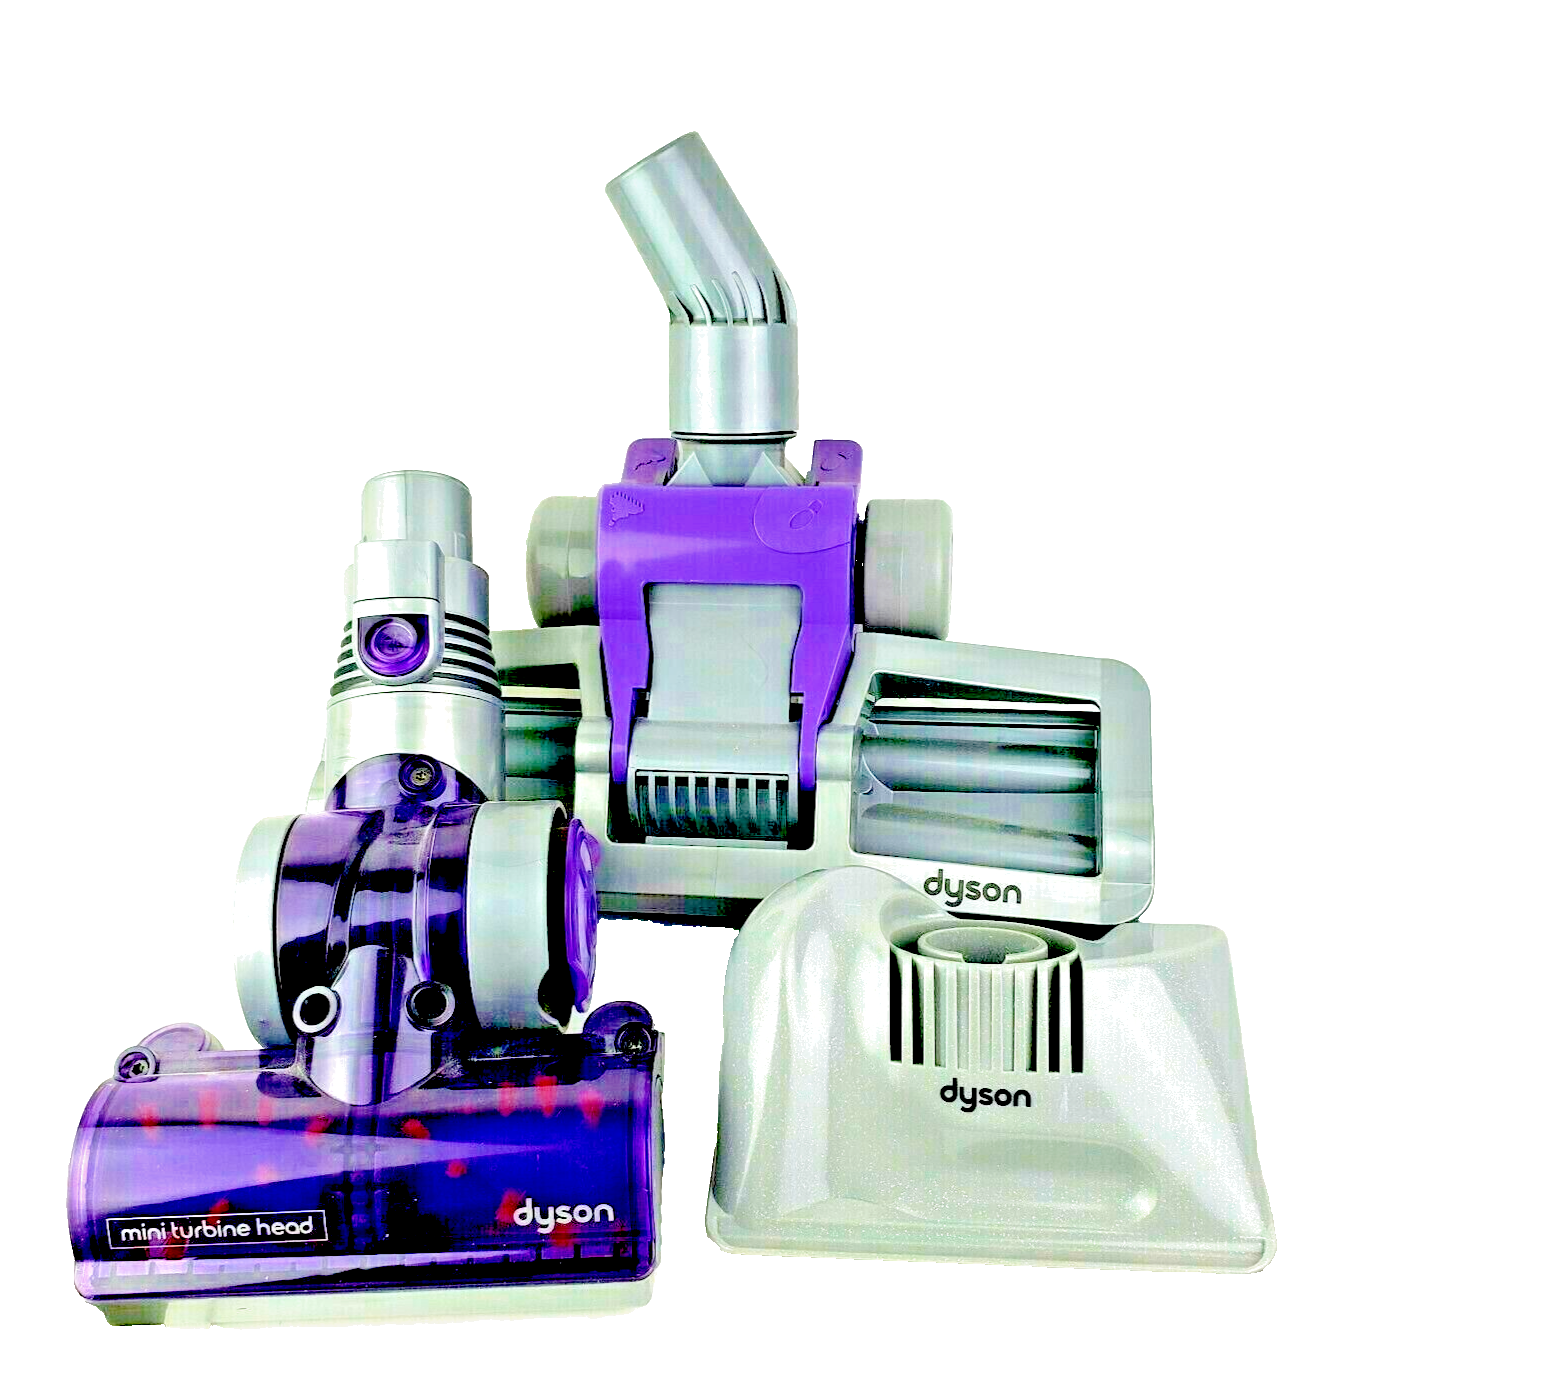 Primary image for Dyson Set of Three Accessory Tools